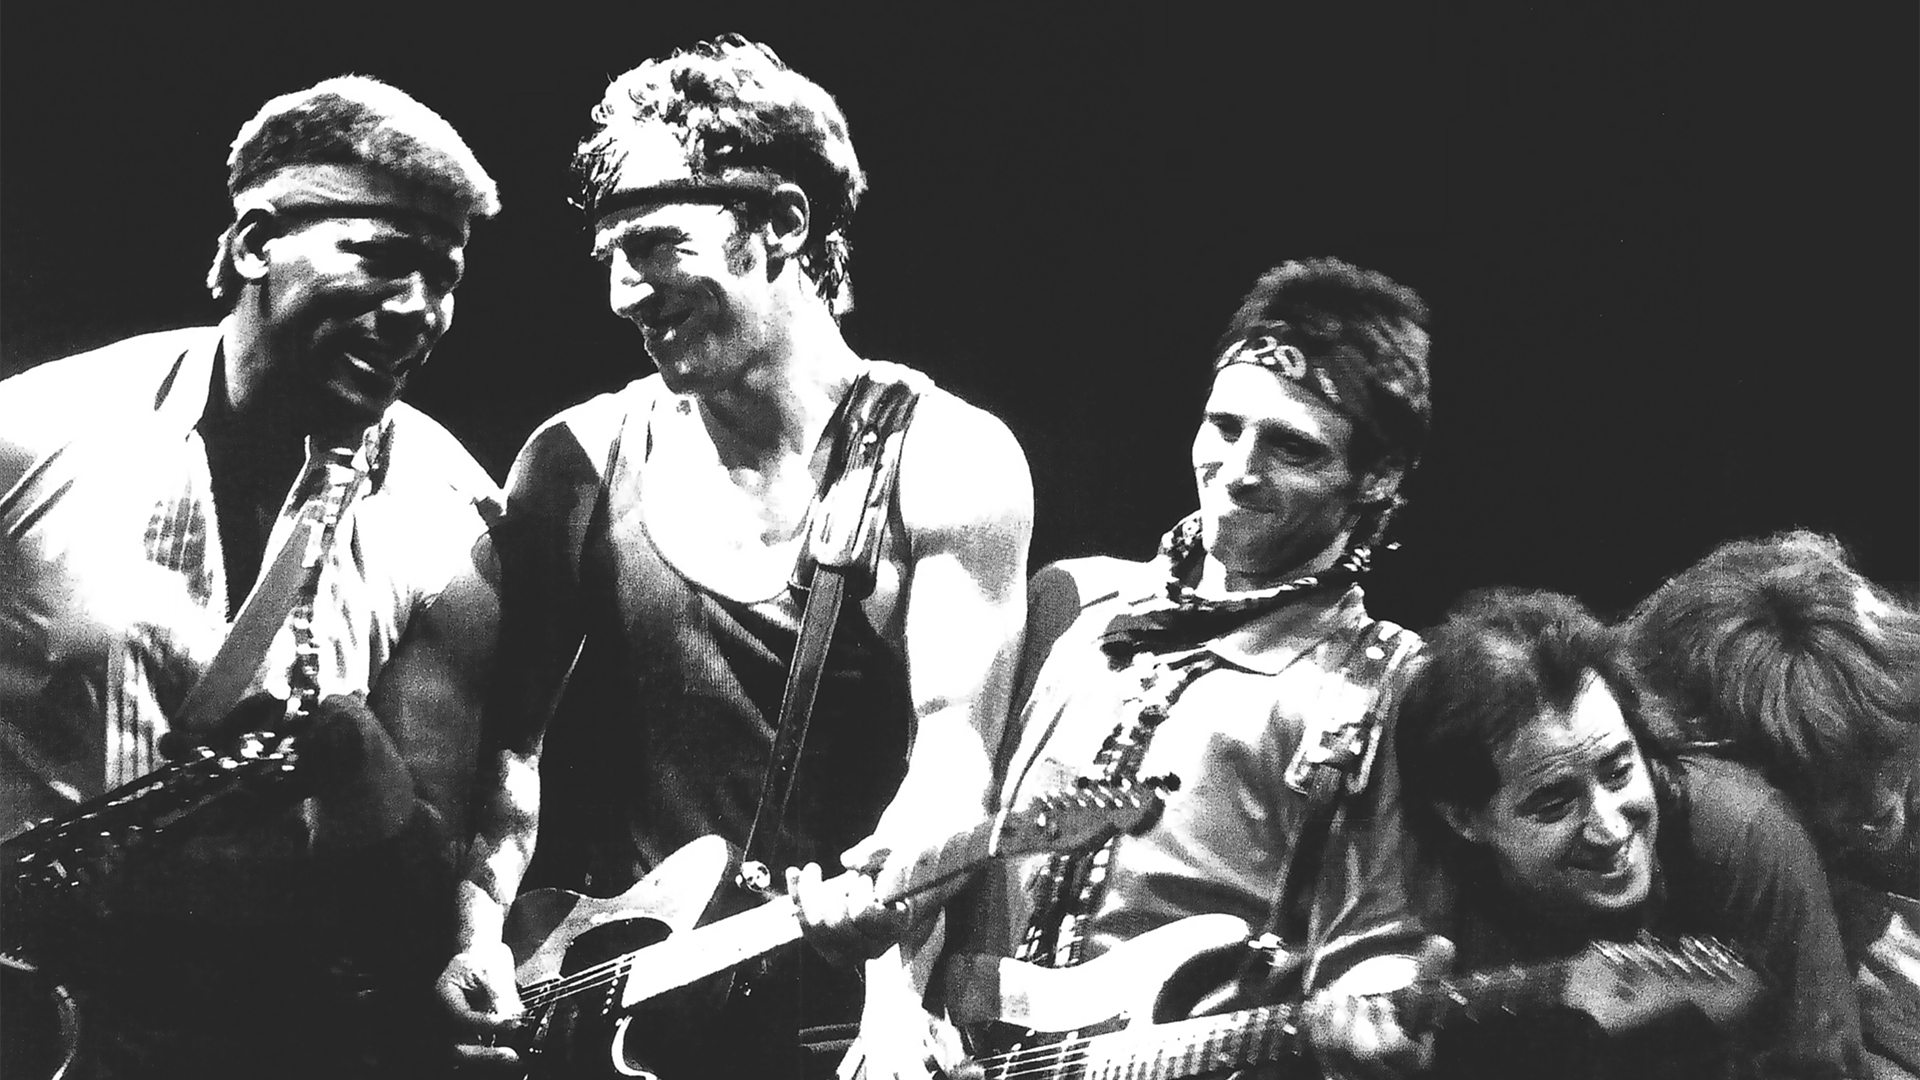 1920x1080 Bruce Springsteen \u0026amp; The E Street Band The Spectrum 1984 [] #Music #IndieArtist #Chicago | Bruce springsteen, E street band, Rock songs